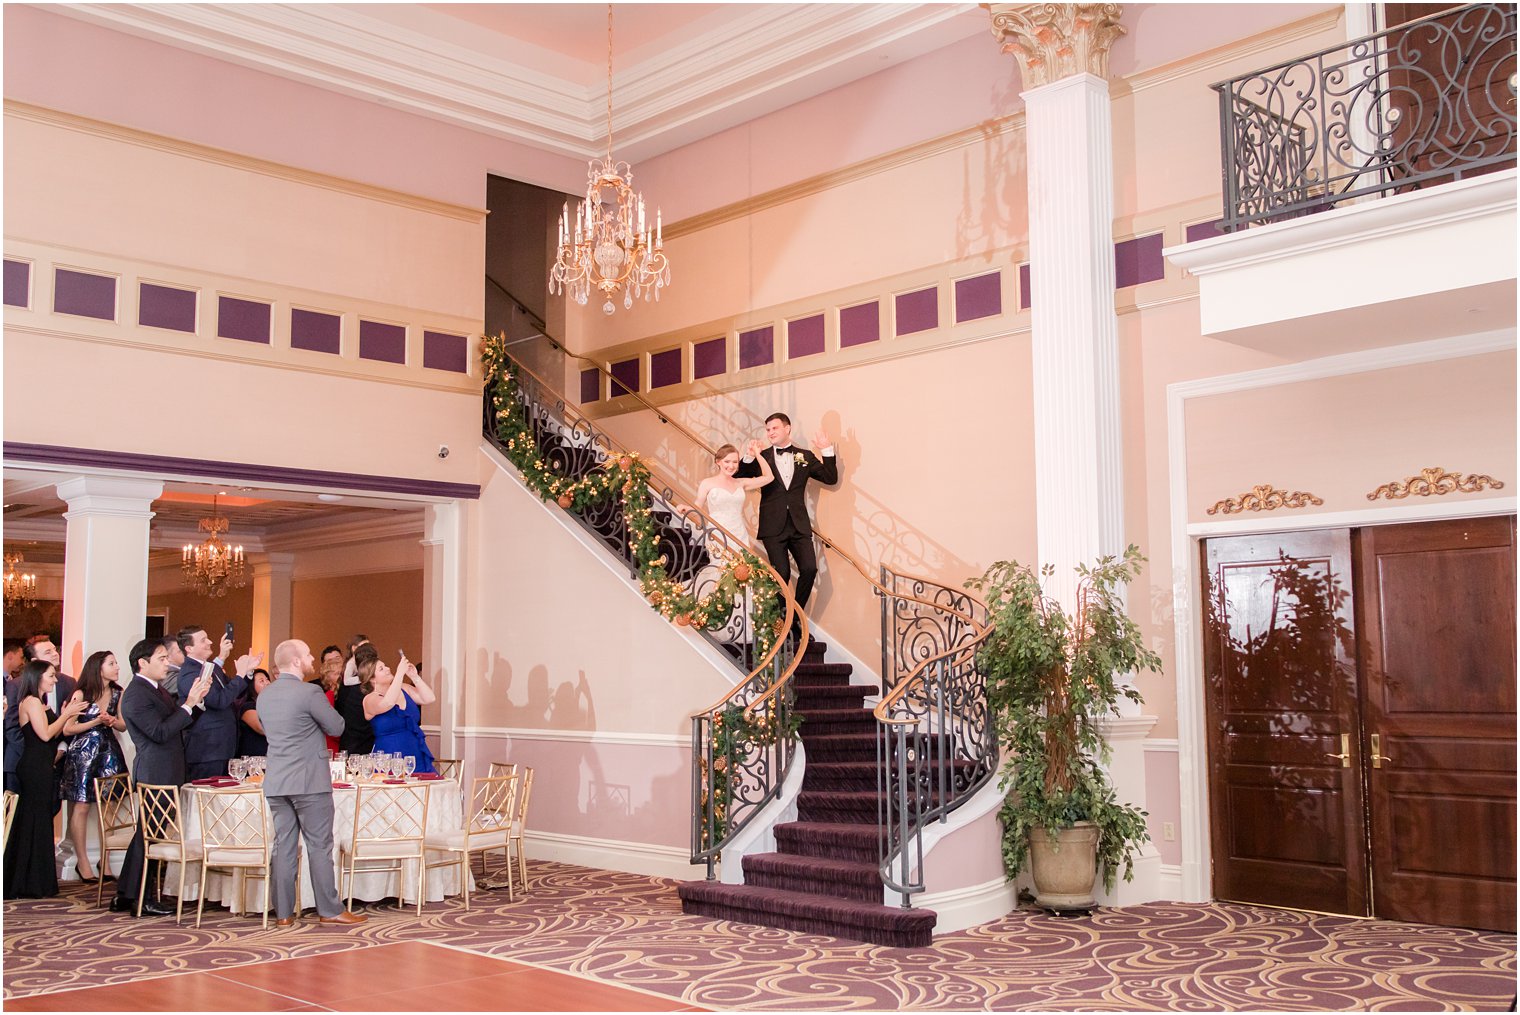 Wedding reception at The Palace at Somerset Park in Somerset NJ